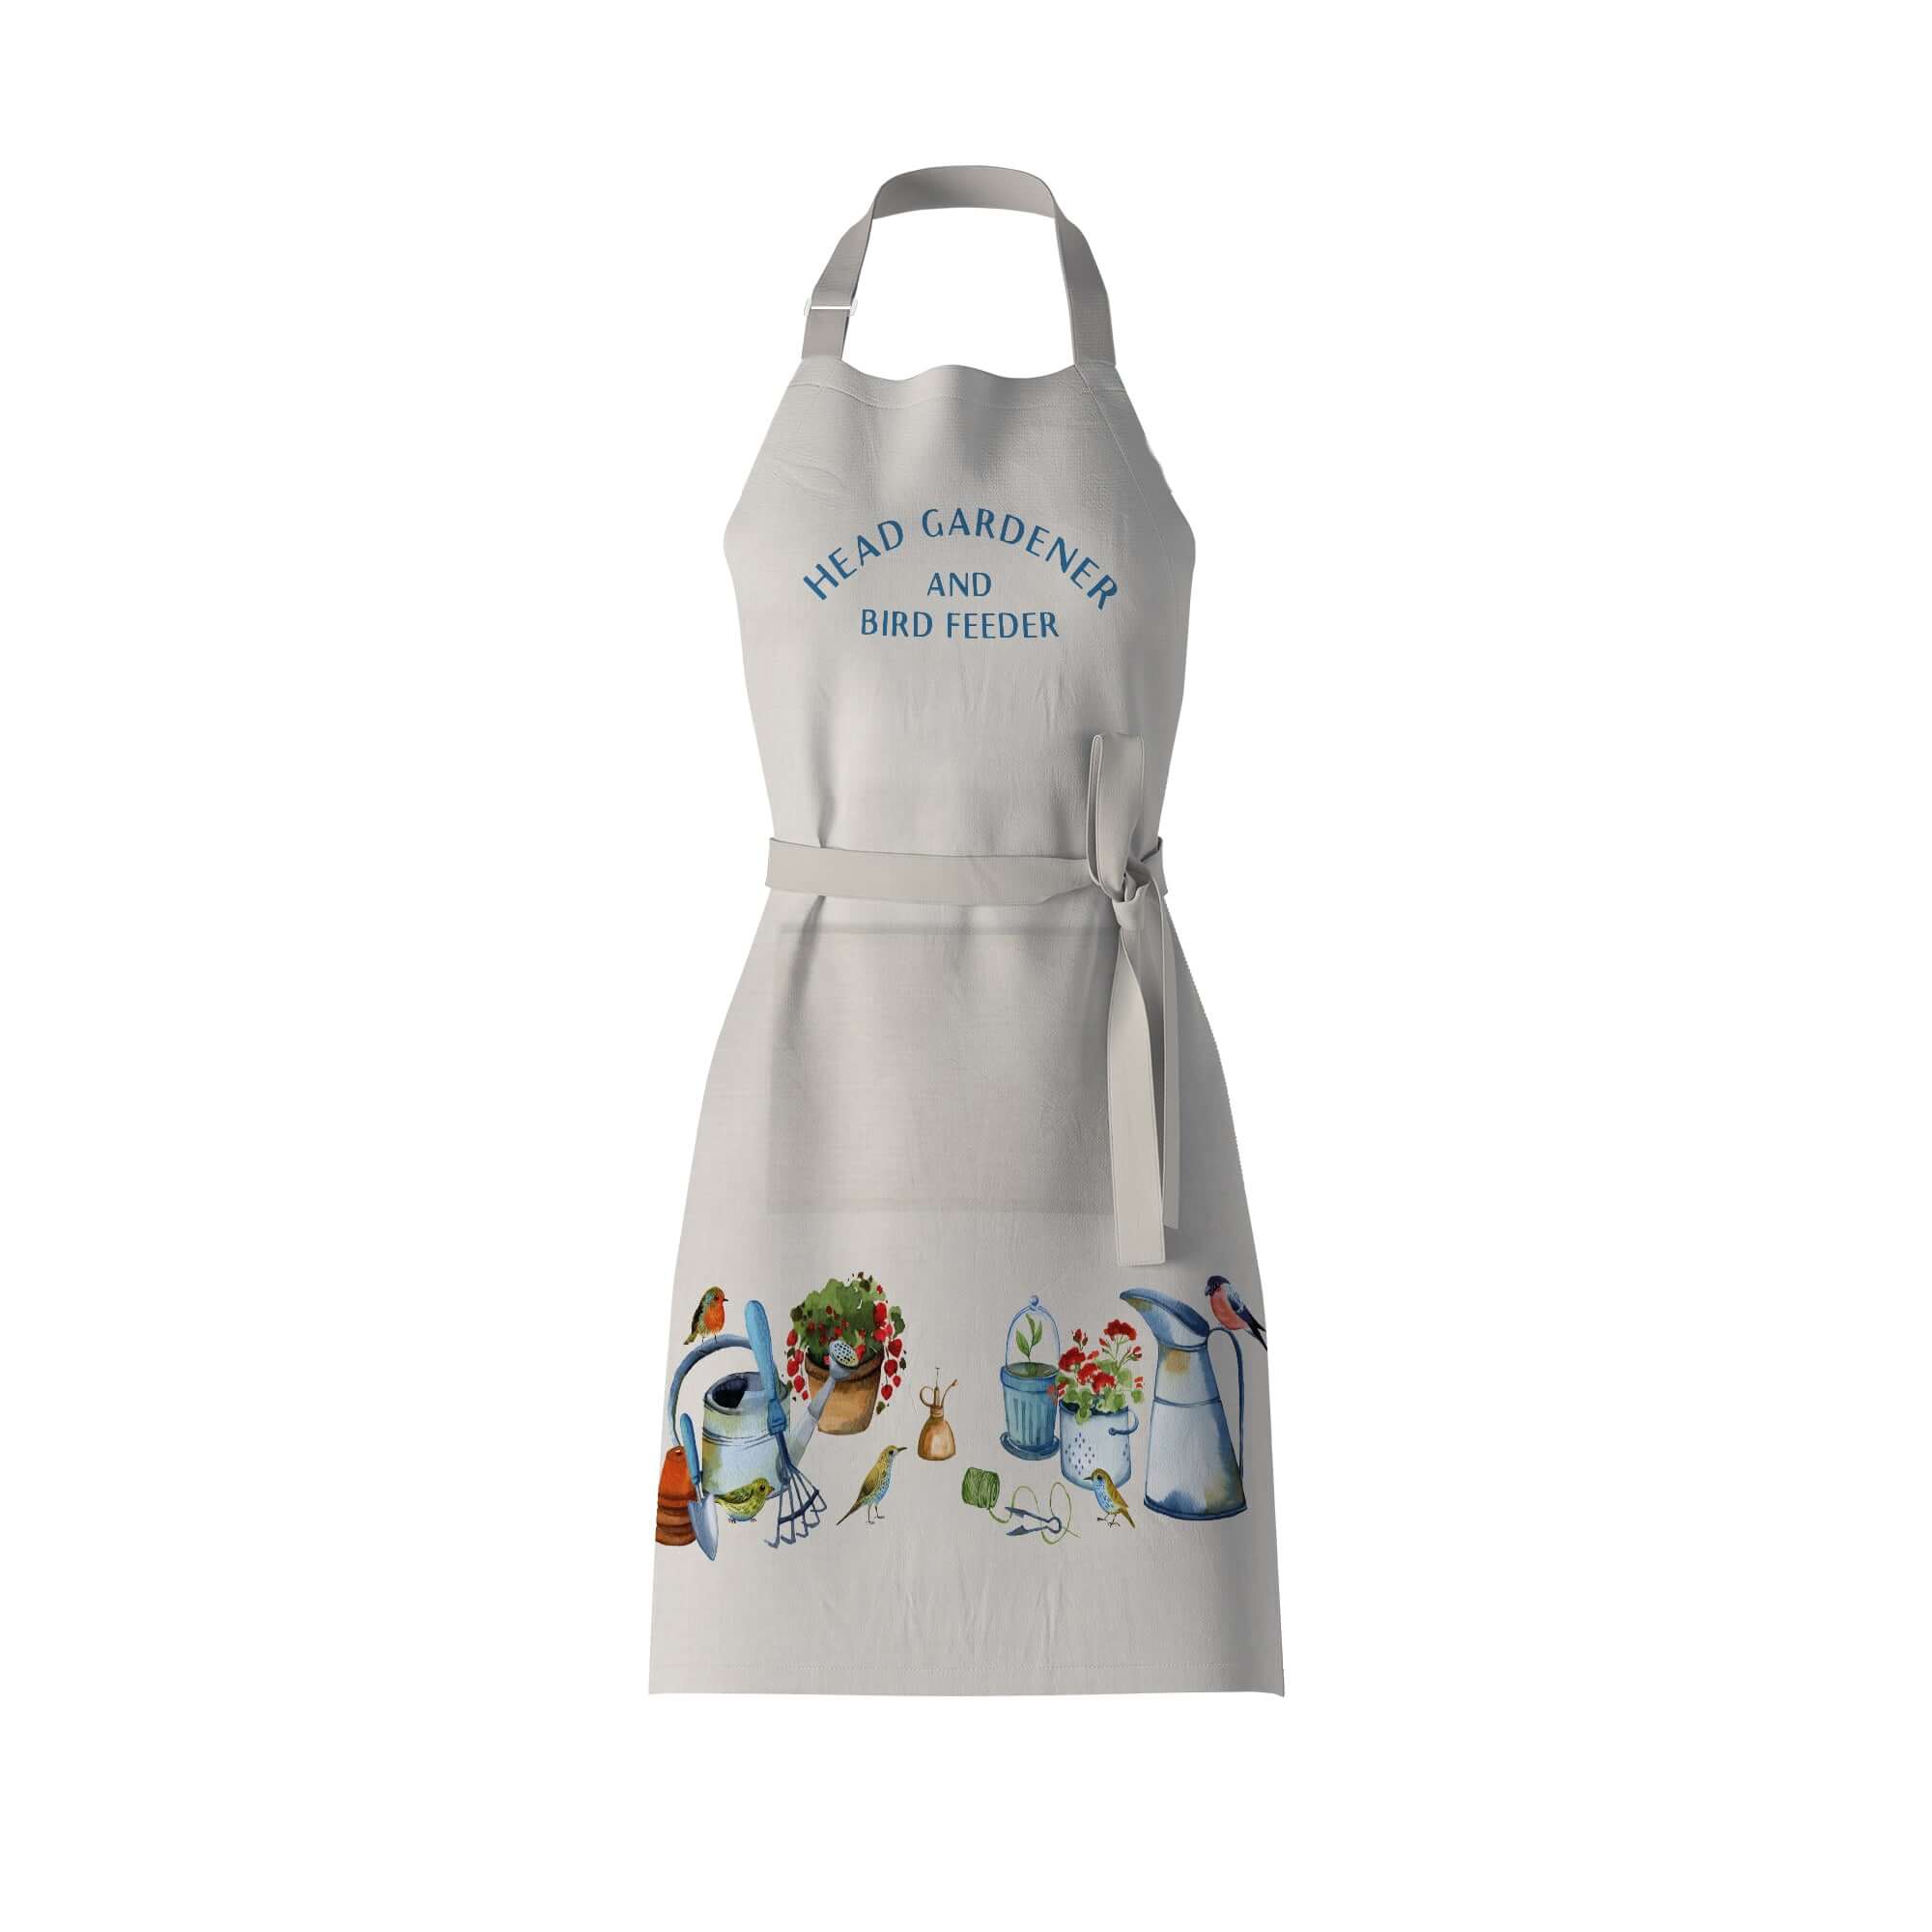 Gardening Apron iwth garden birds, plants and gardening tools woth head gardener and bird feeder on poly linen apron. Mustard and Gray